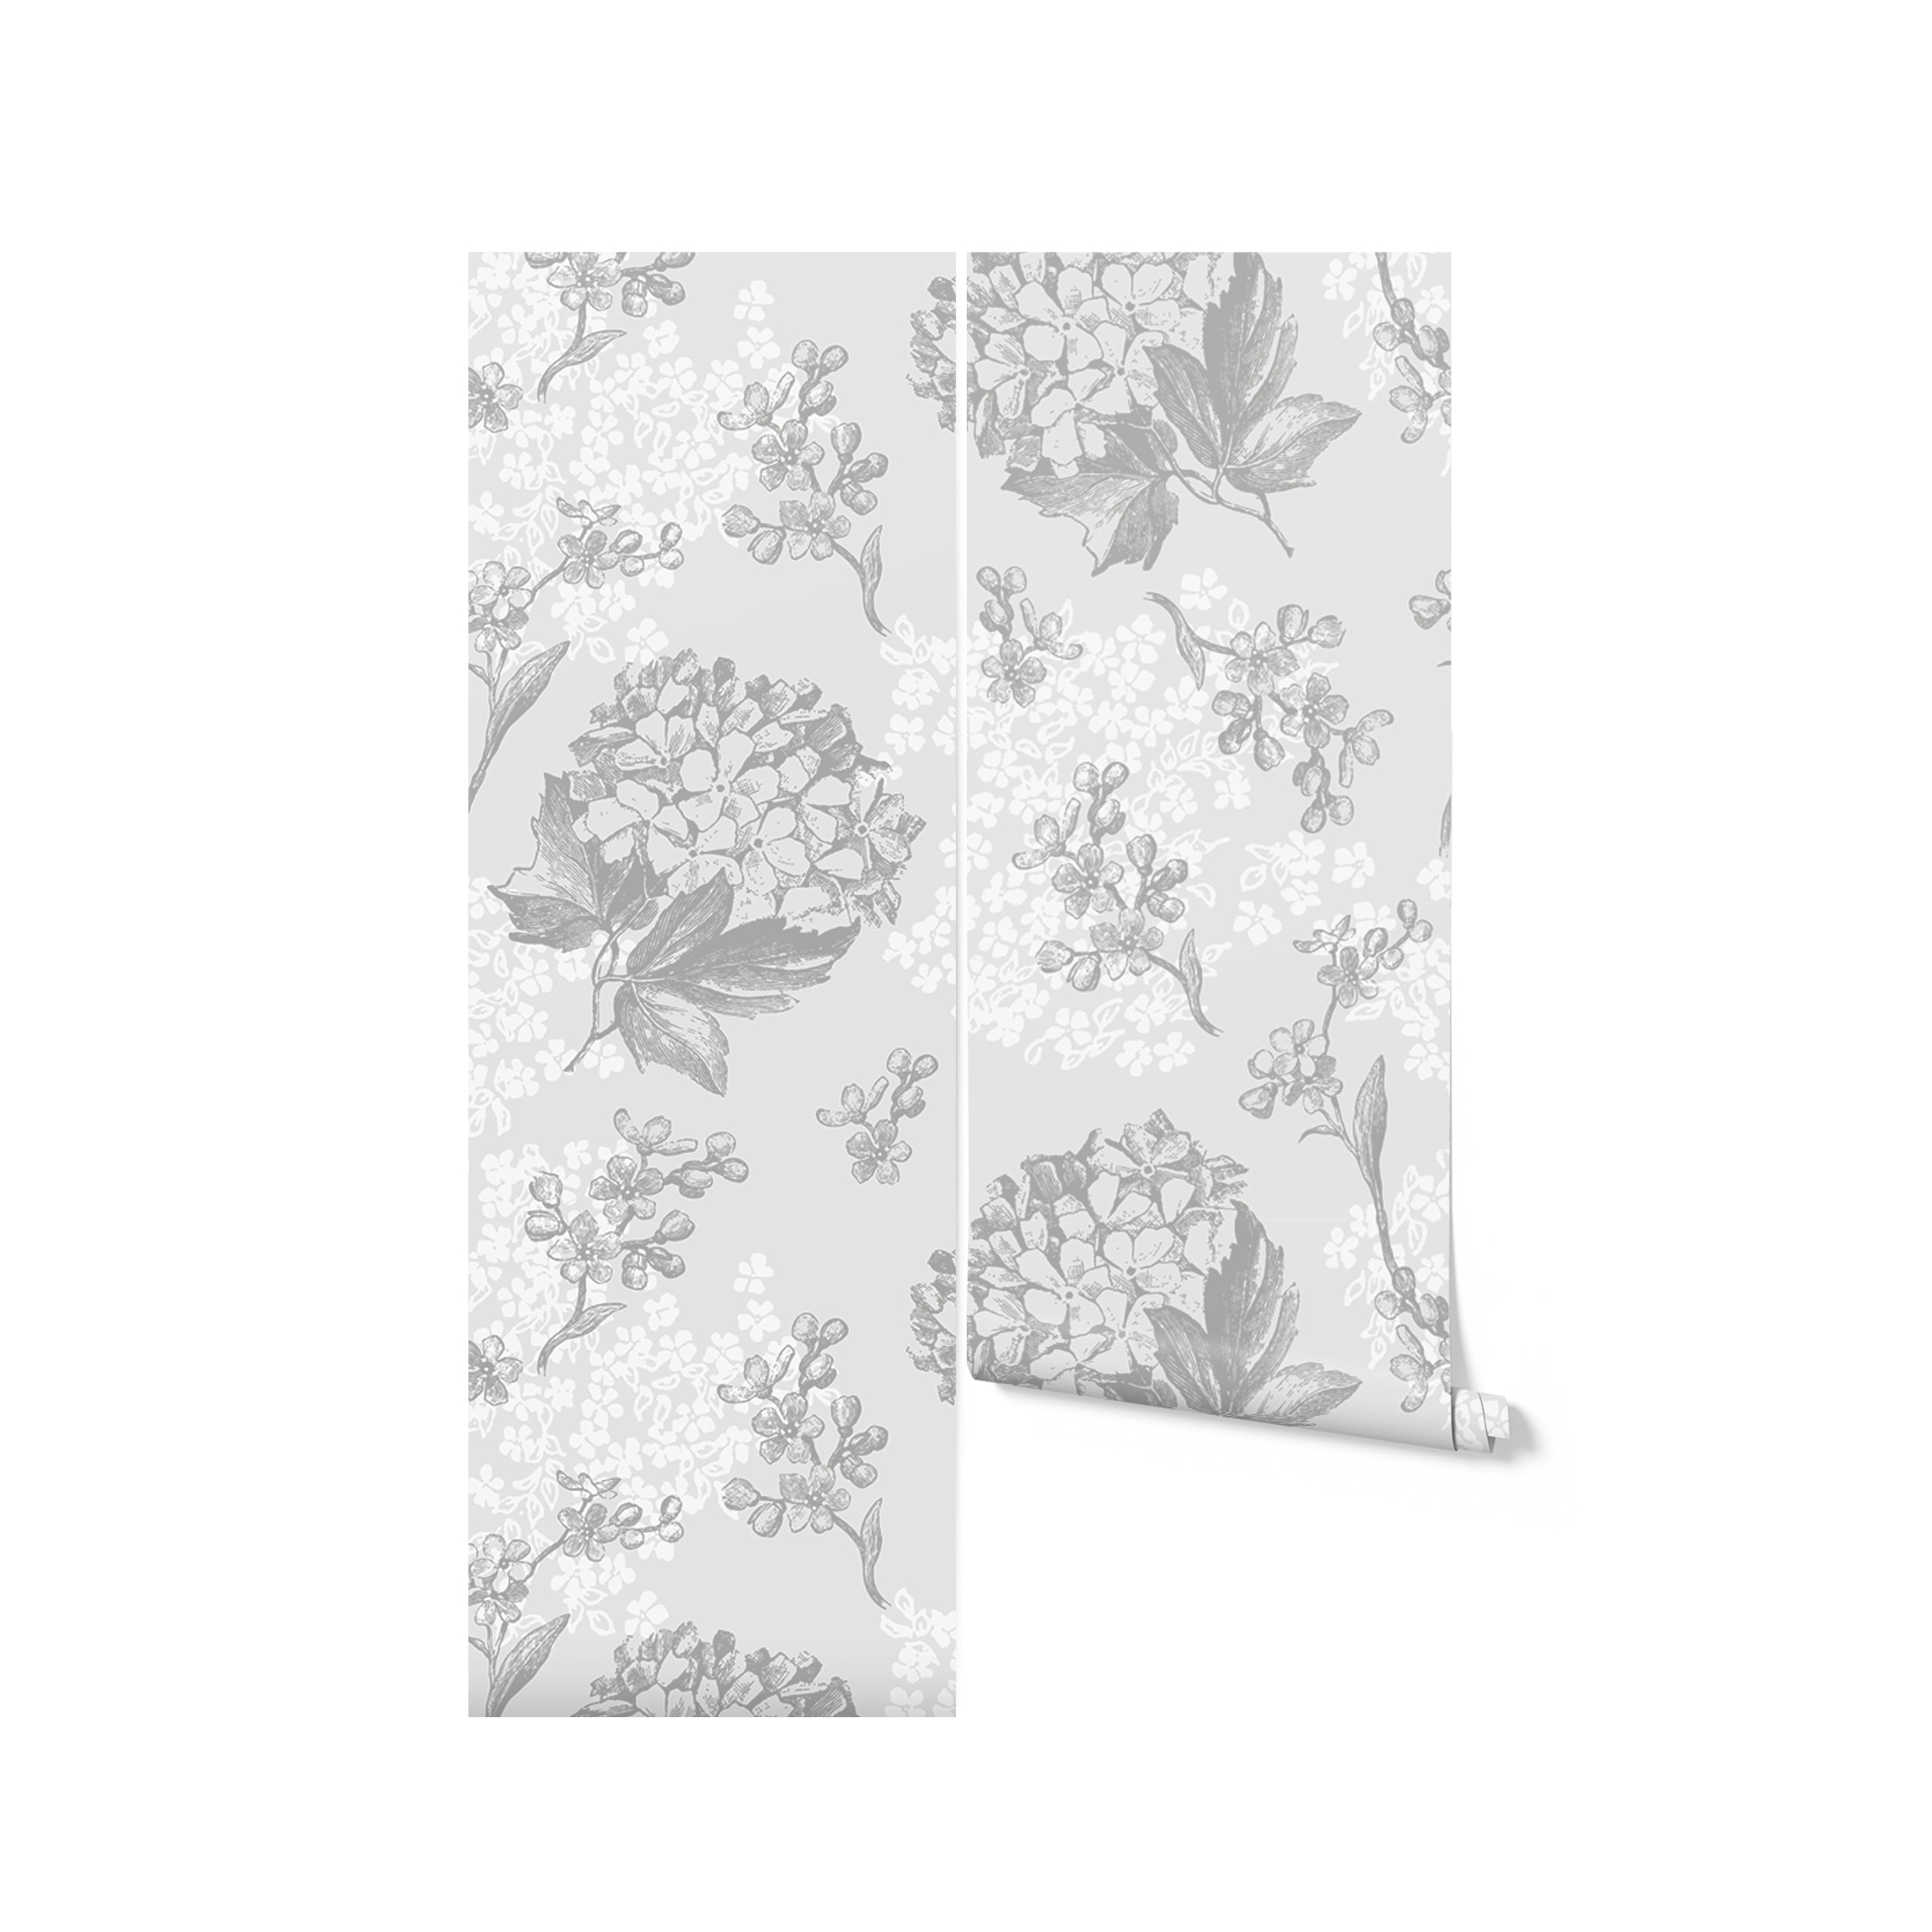 Roll of Modern Hydrangea Wallpaper, displaying detailed grey hydrangea flowers on a soft background. This wallpaper brings a touch of modern elegance and botanical beauty to any room, ideal for creating a statement wall